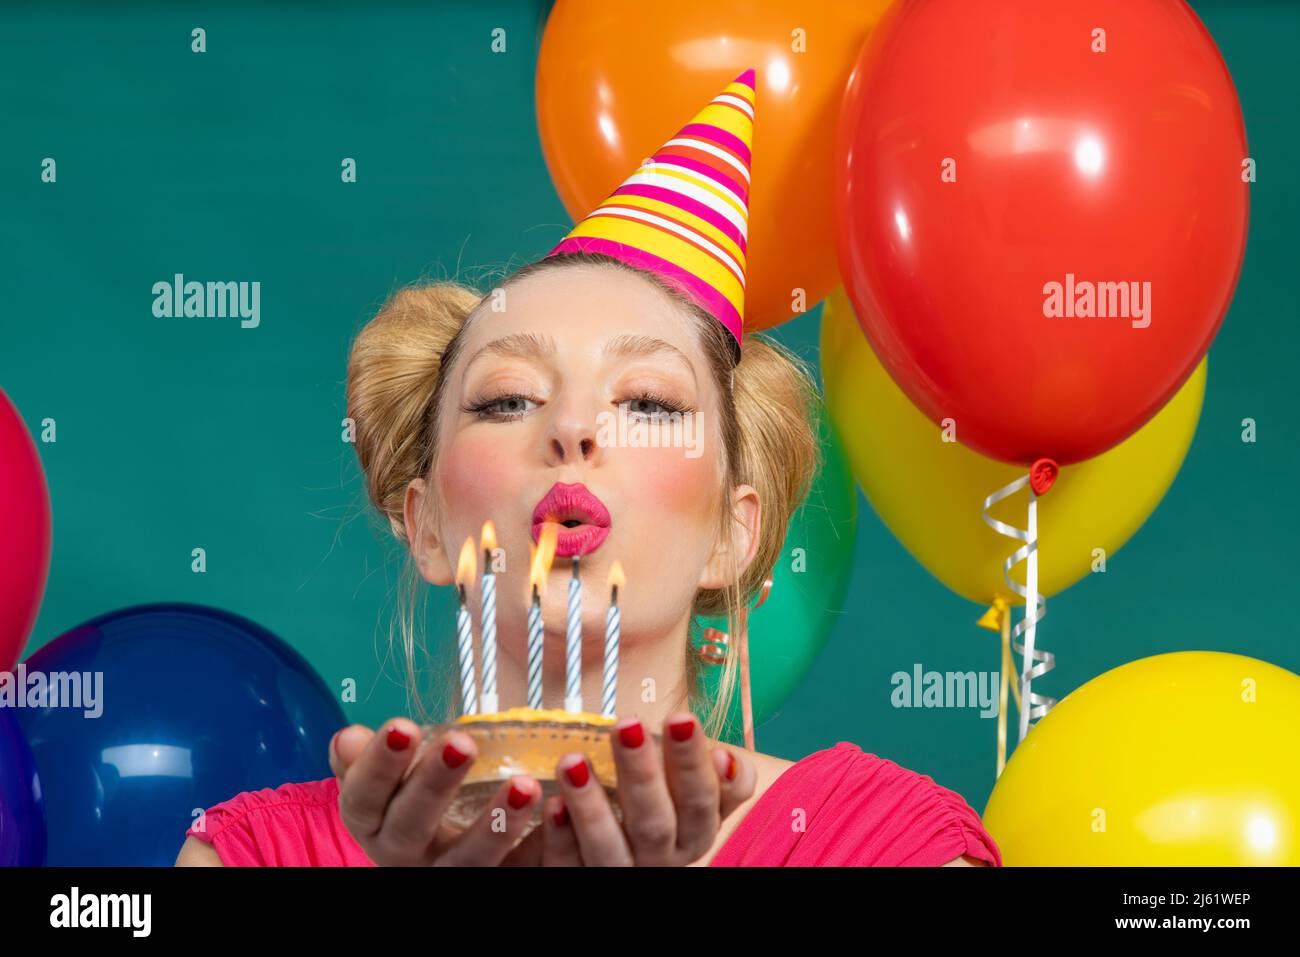 Beautiful young woman wearing party hat blowing candles on birthday cake against green background Stock Photo